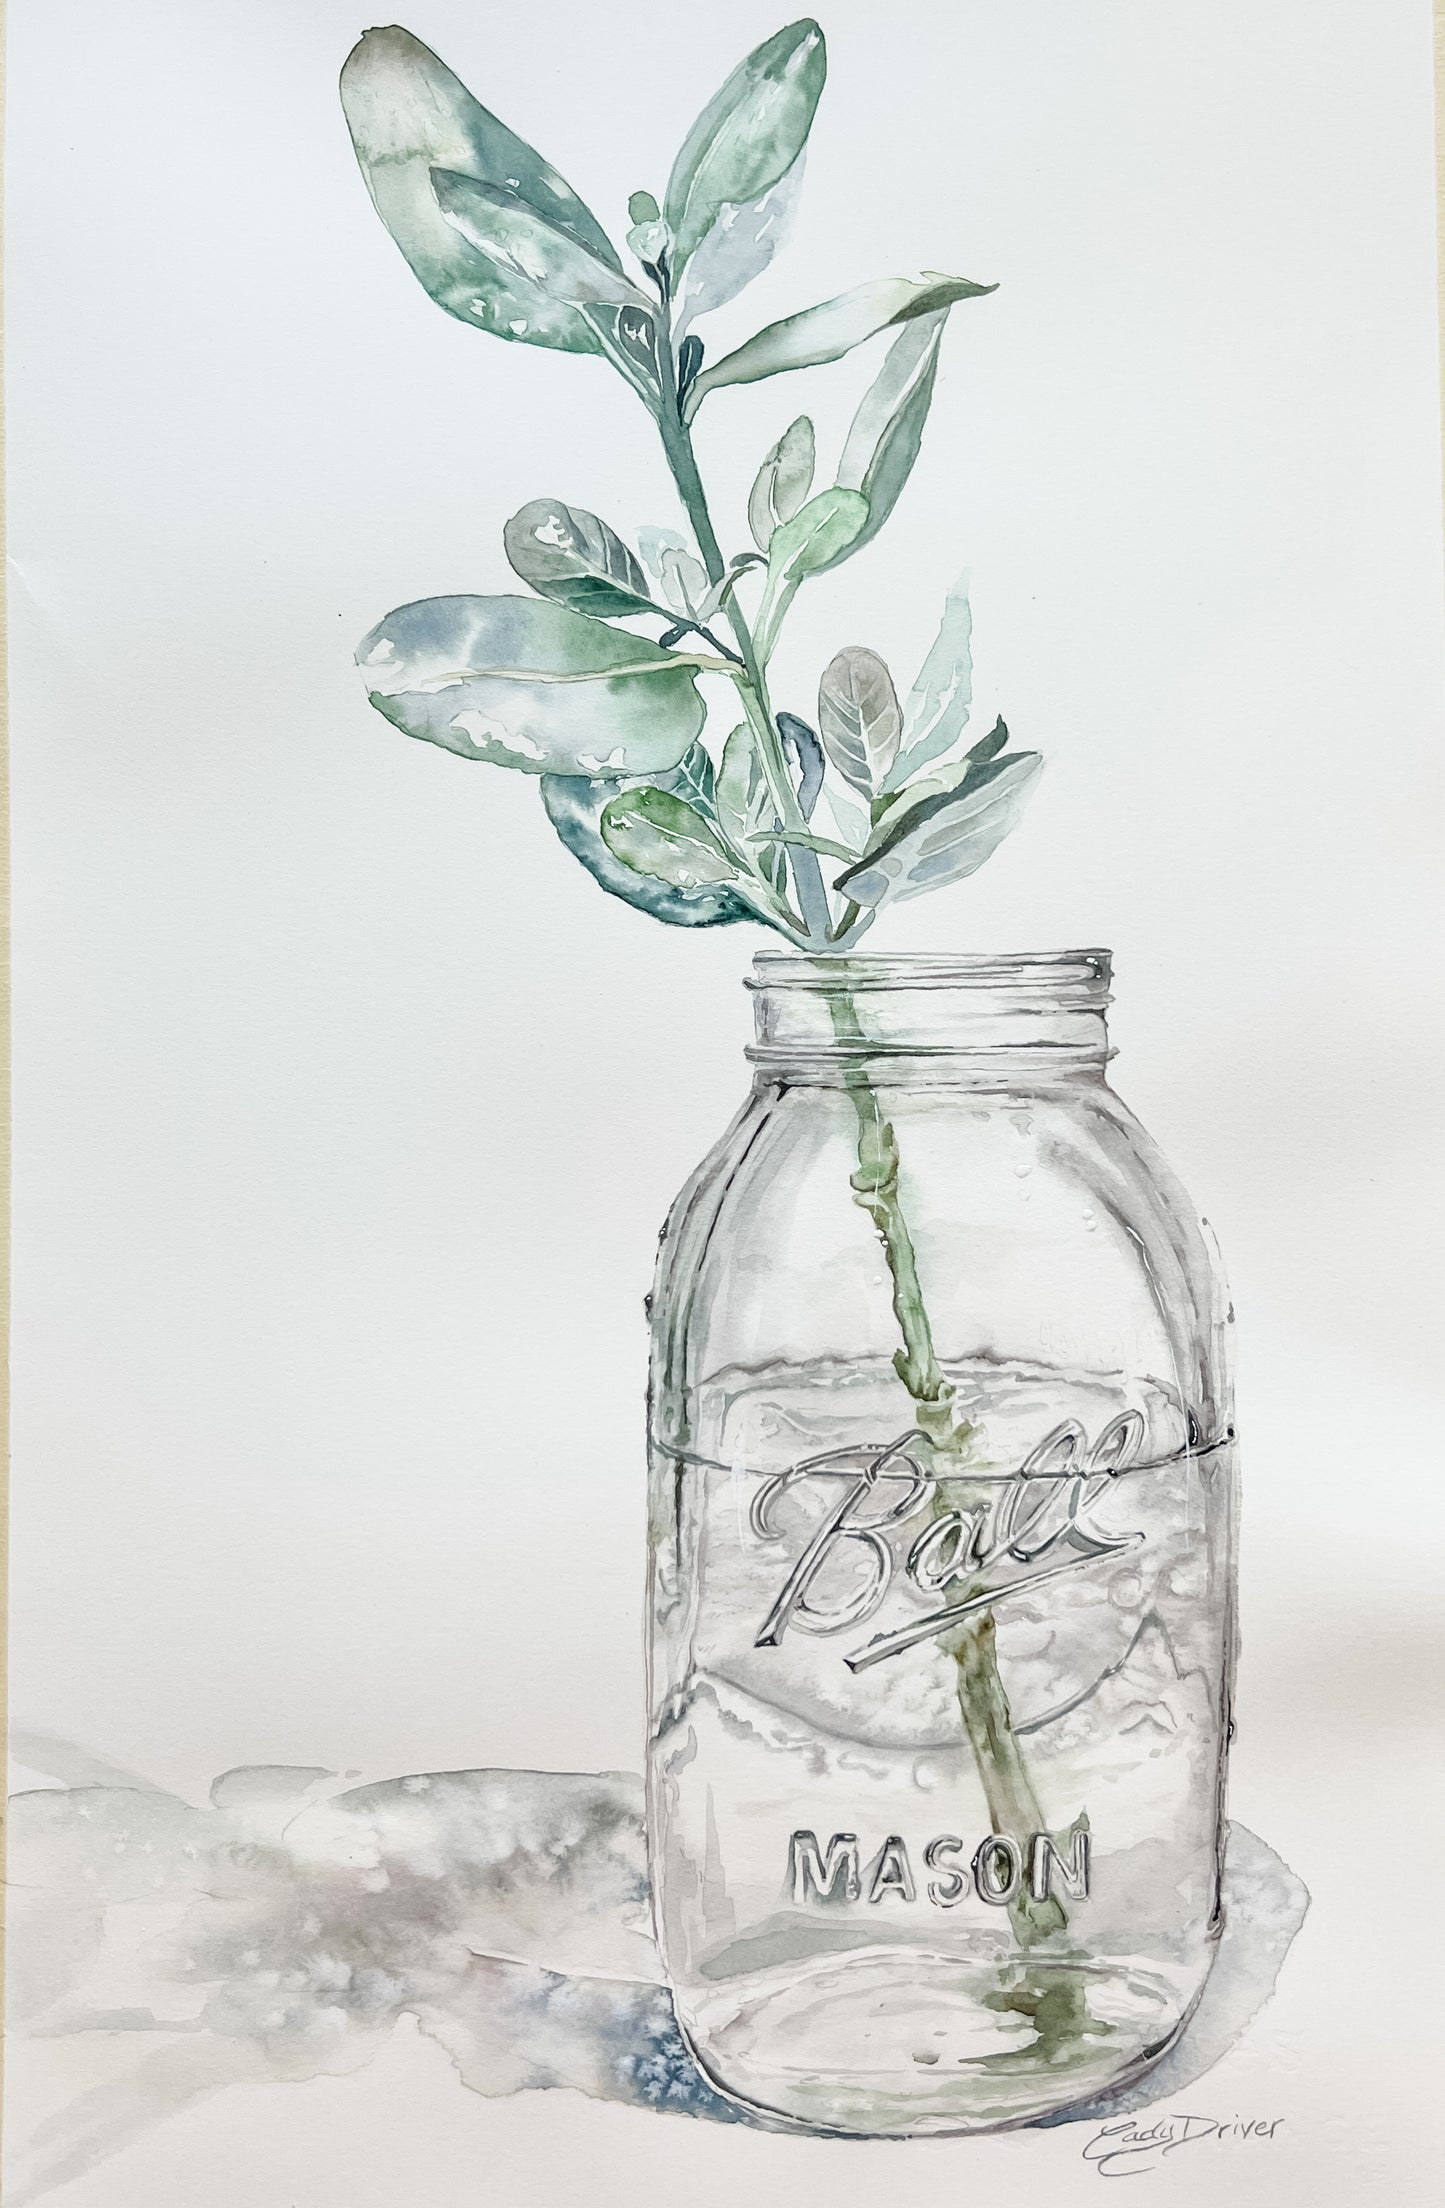 Light watercolor ball jar art in grey and muted green hues